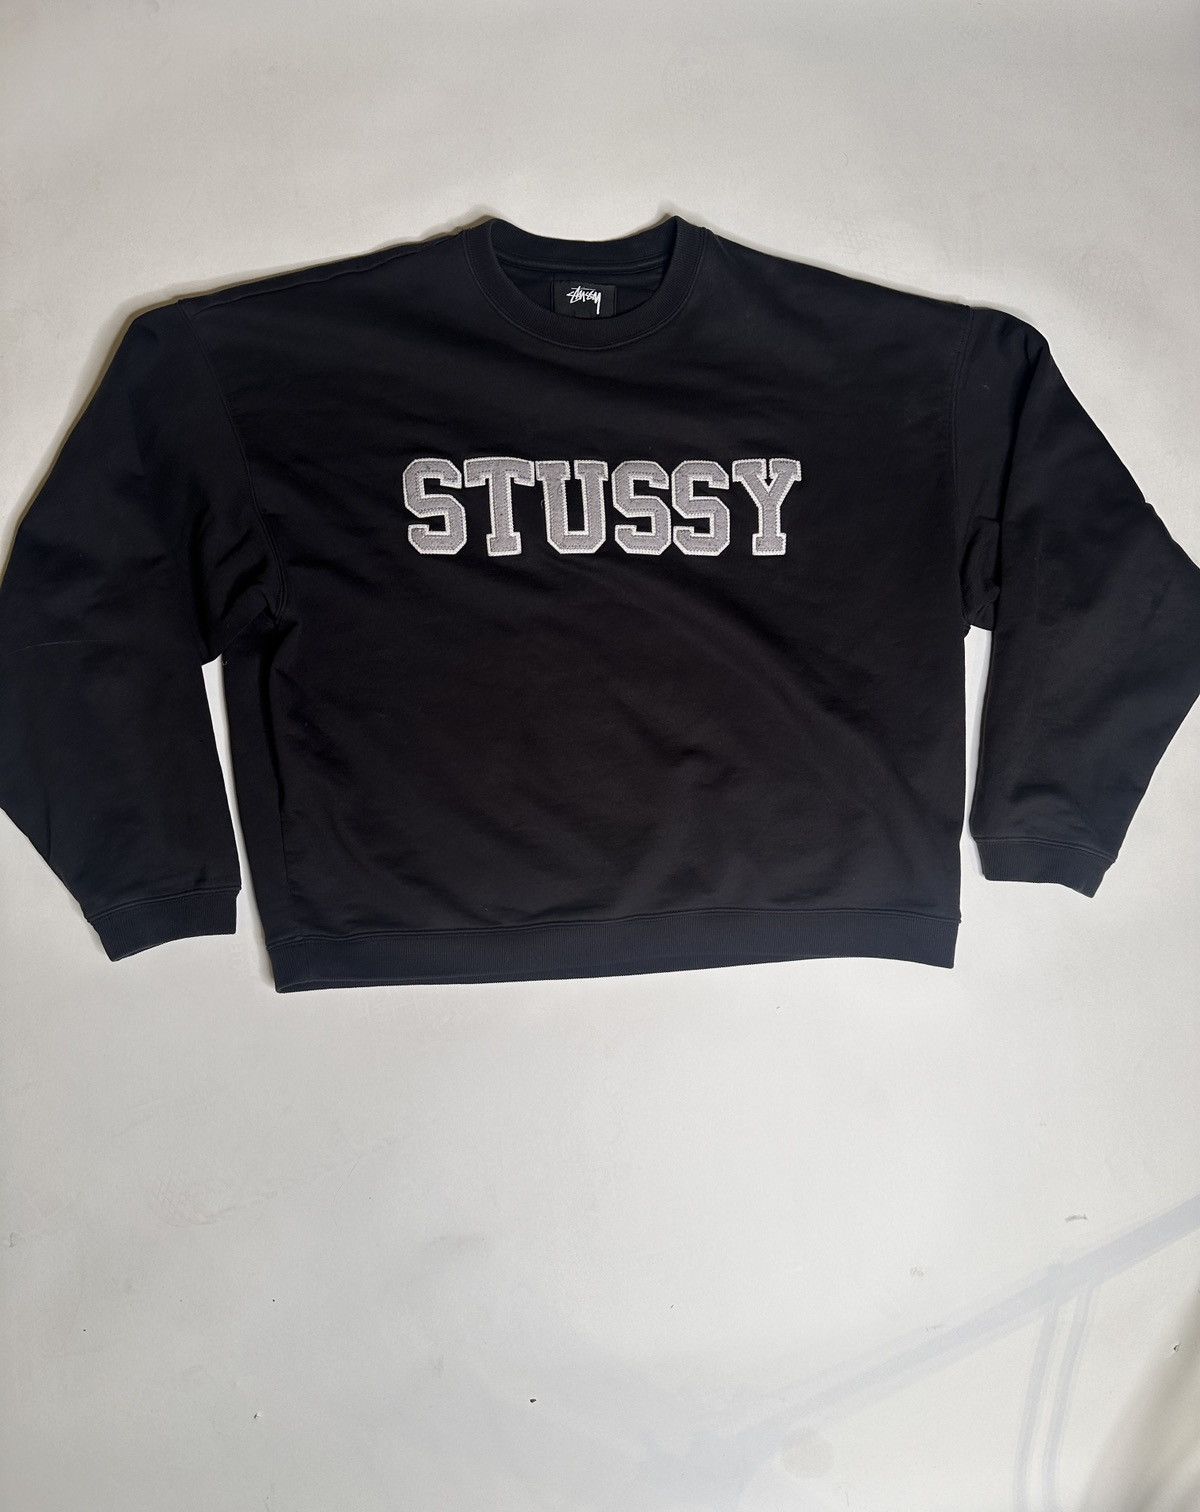 Stussy Study relaxed oversized crewneck | Grailed